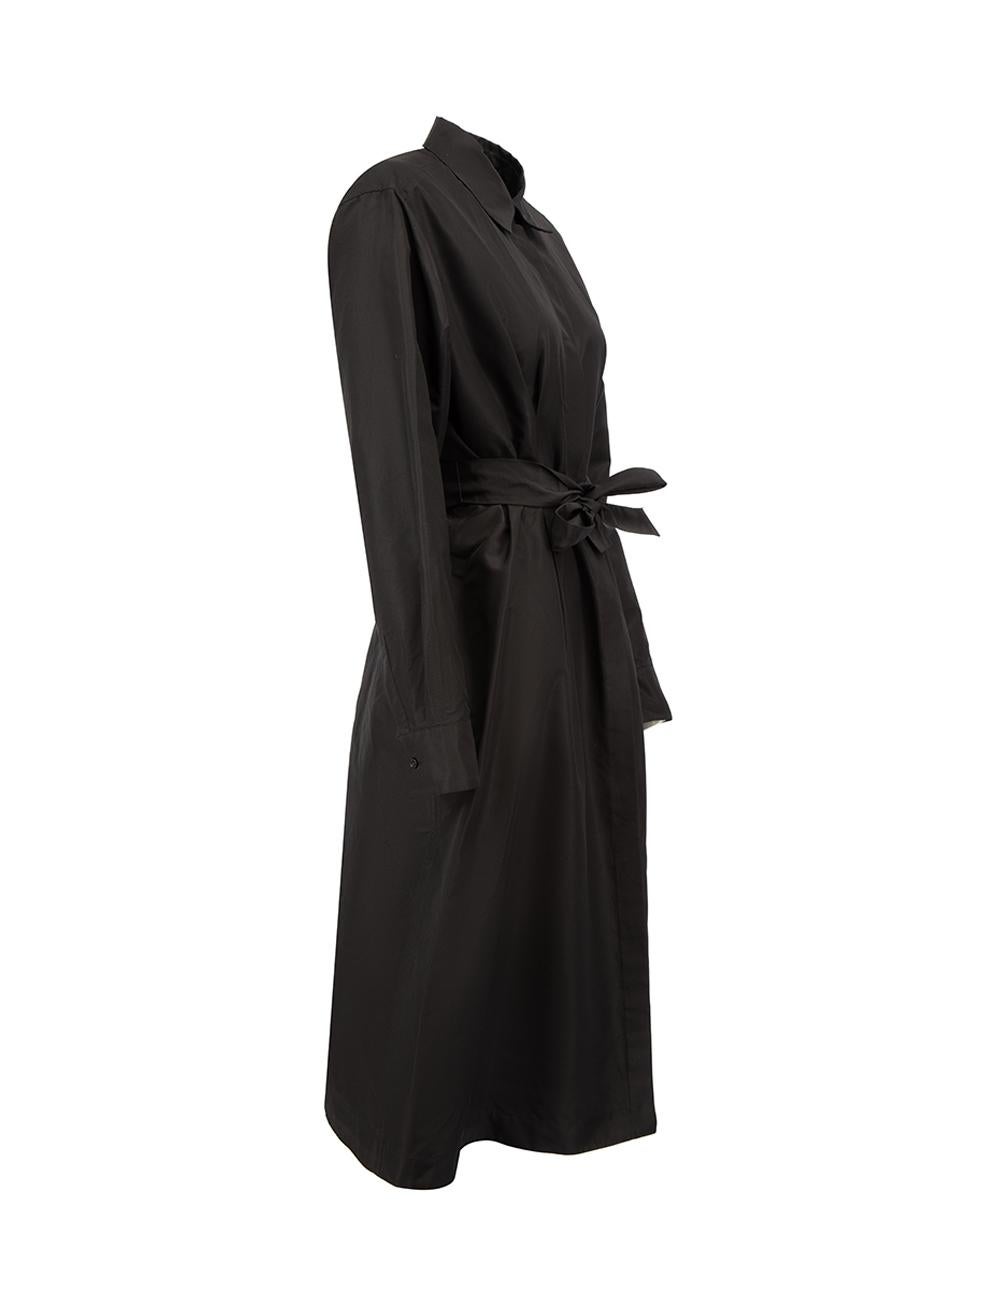 CONDITION is Very good. Hardly any visible wear to dress is evident however negligible marks may be found on this used Jil Sander designer resale item.



Details


Black

Silk

Shirt dress

Midi

Button up fastening

Tie belt

Buttoned